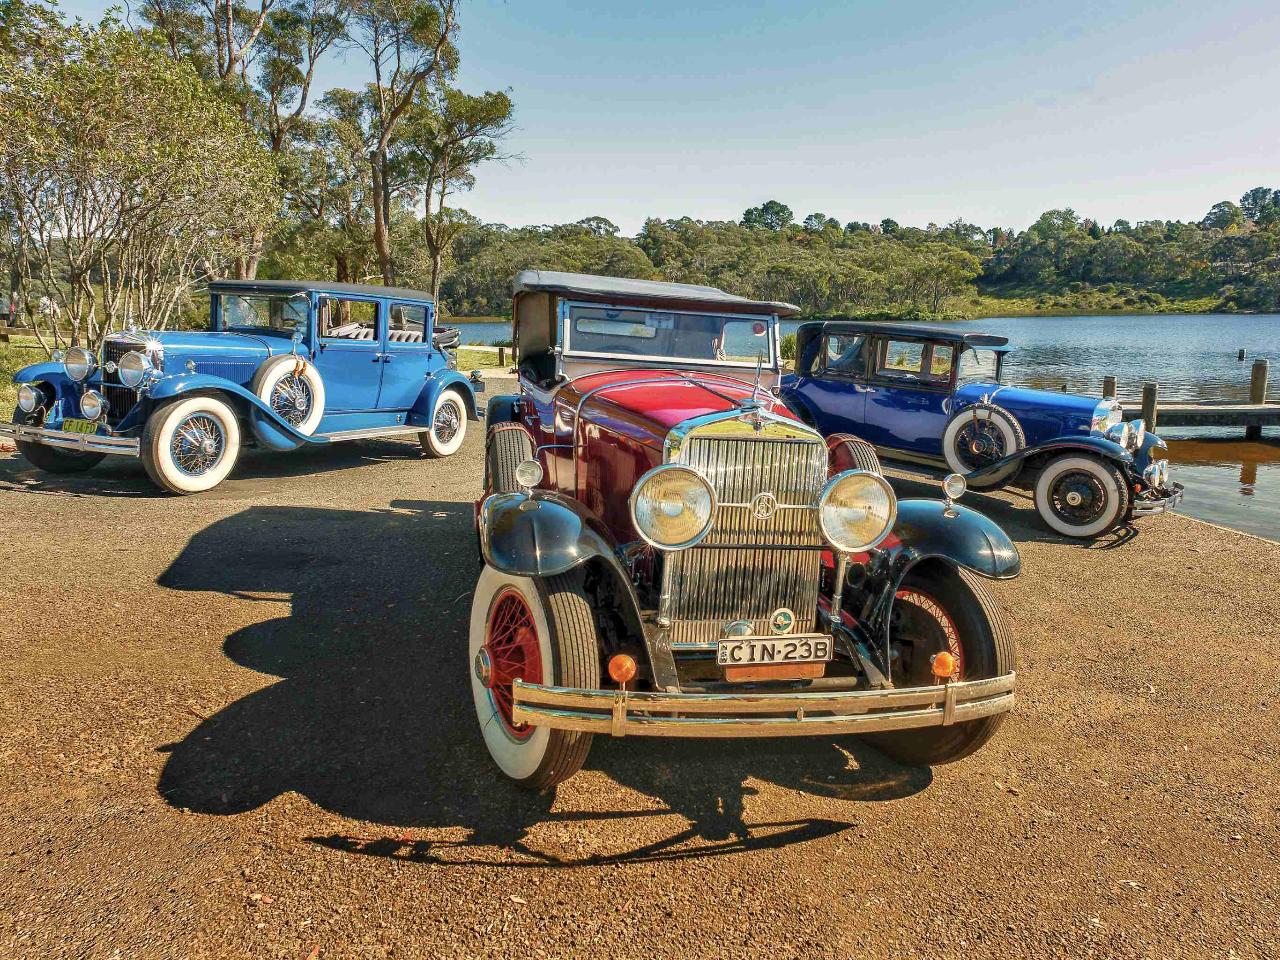 Three hour Blue Mountains Tour in one of our Vintage 1929 Cadillac LaSalles with a luxurious picnic at a private lakeside location.